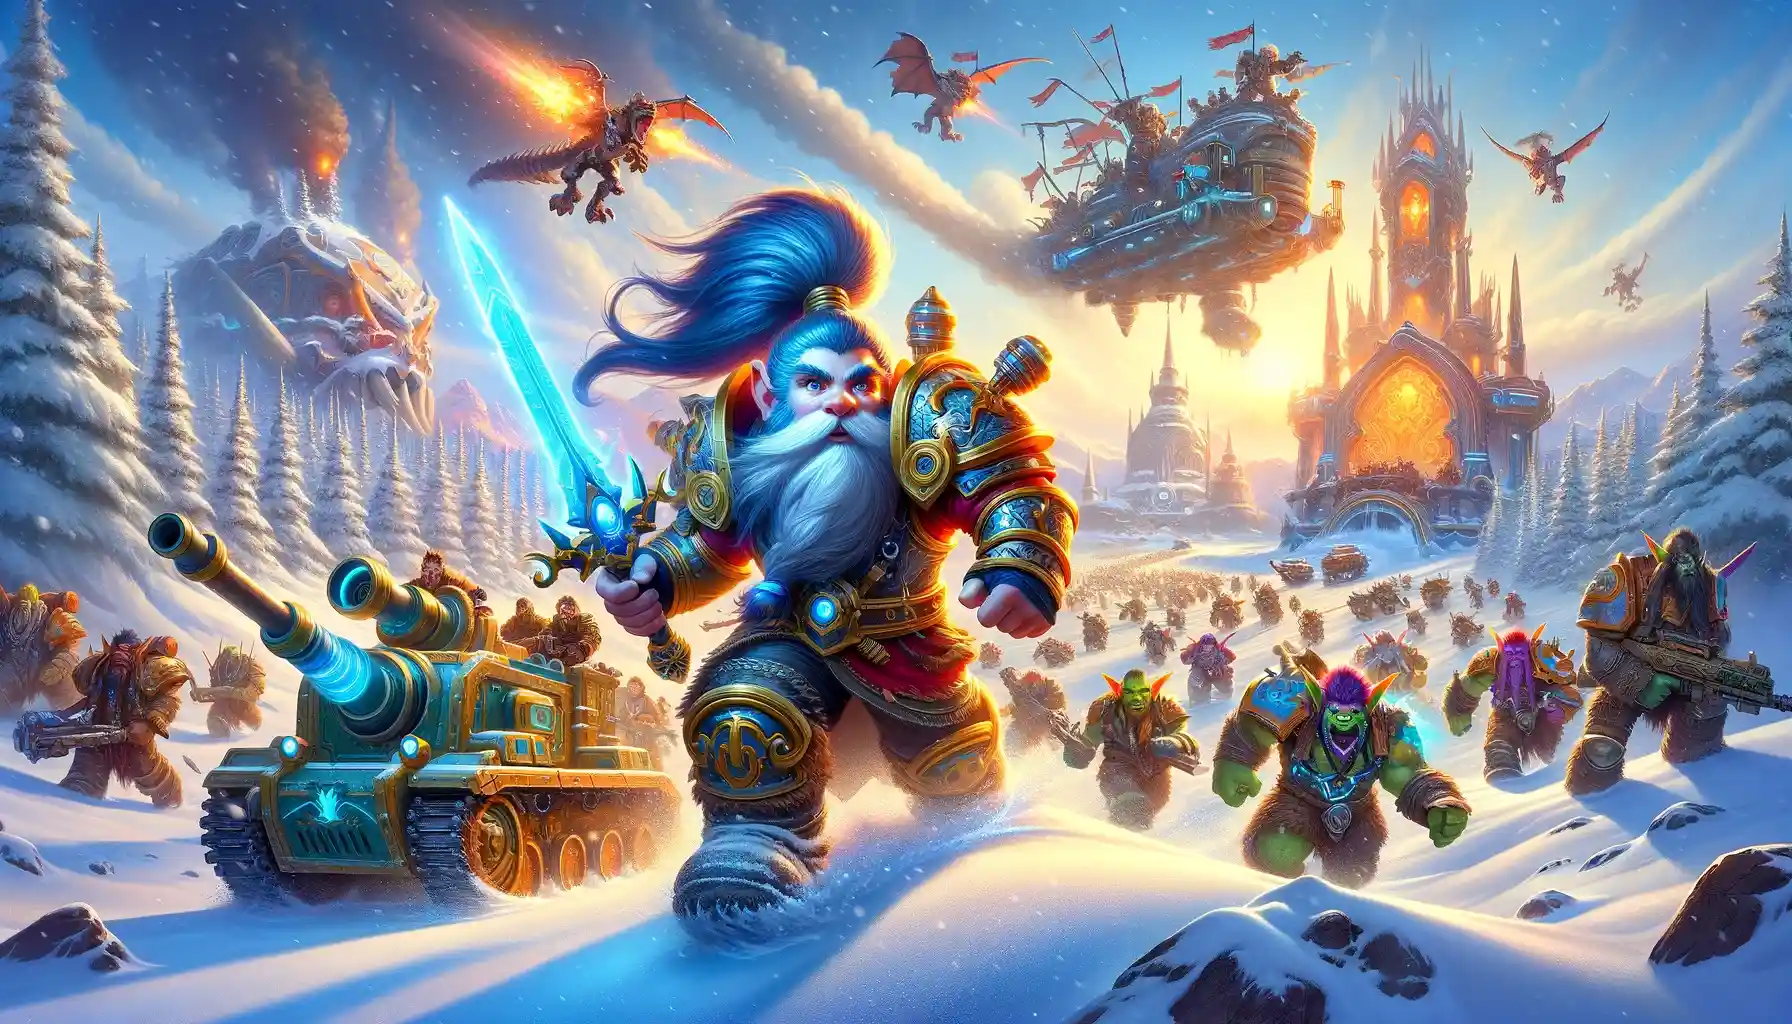 Gnomeregan'S Uprising In Wow Classic: A Rally To Reclaim!